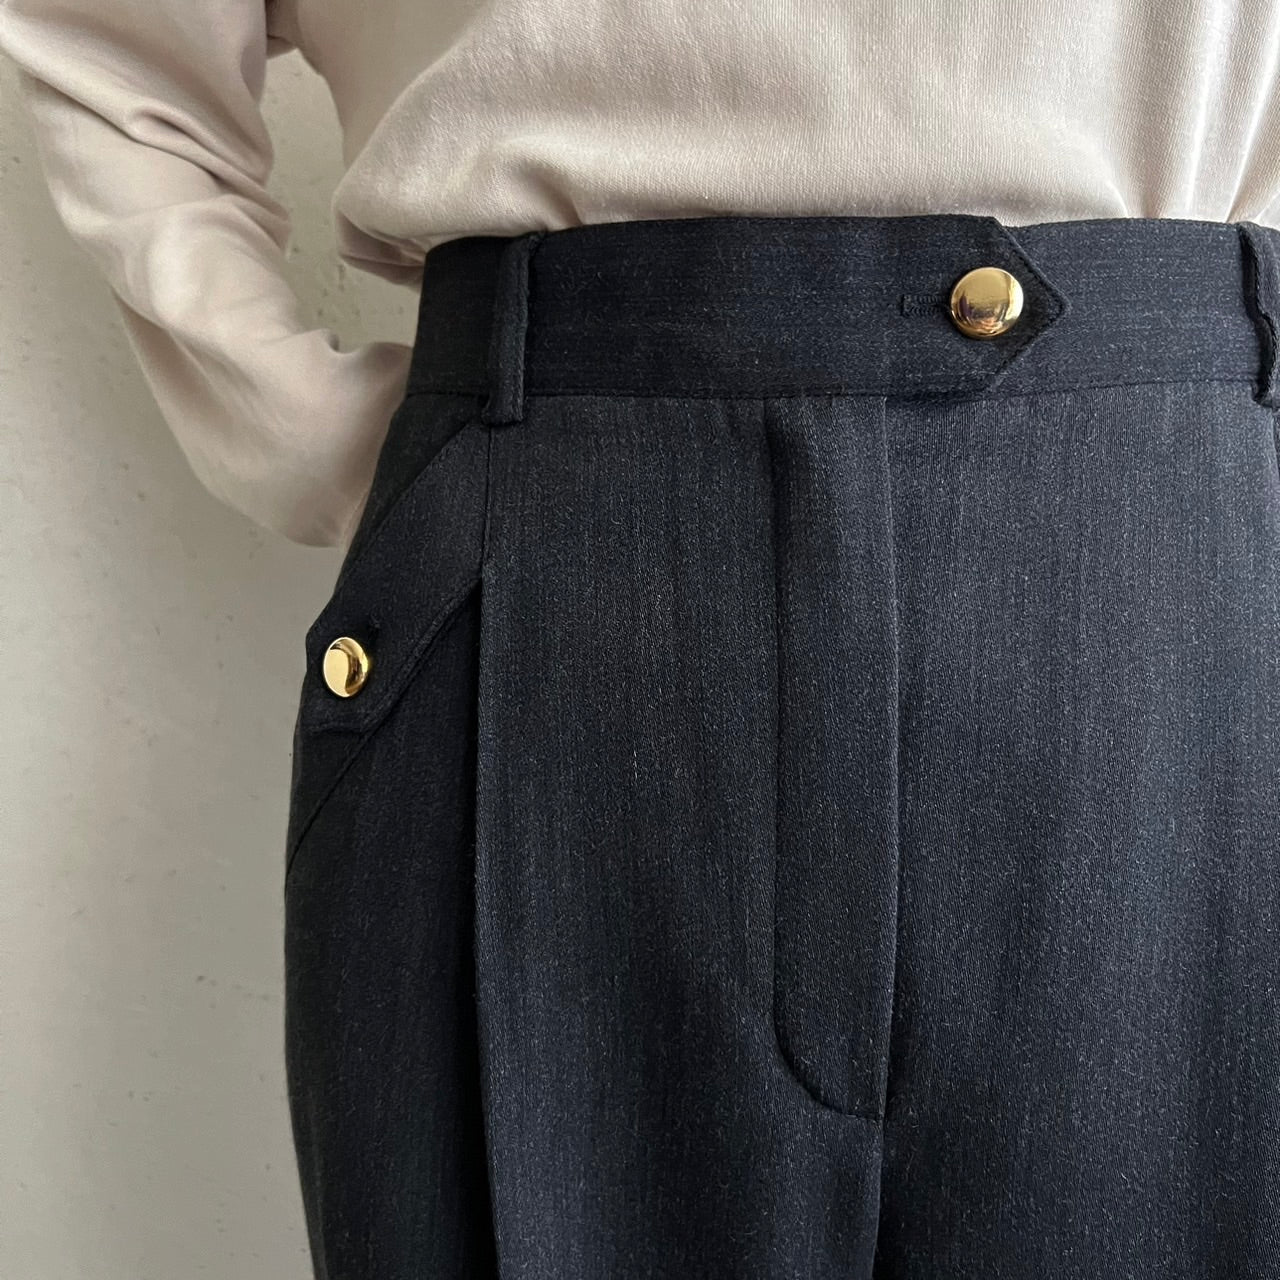 90s "ESCADA" Wool Pants Made in Germany